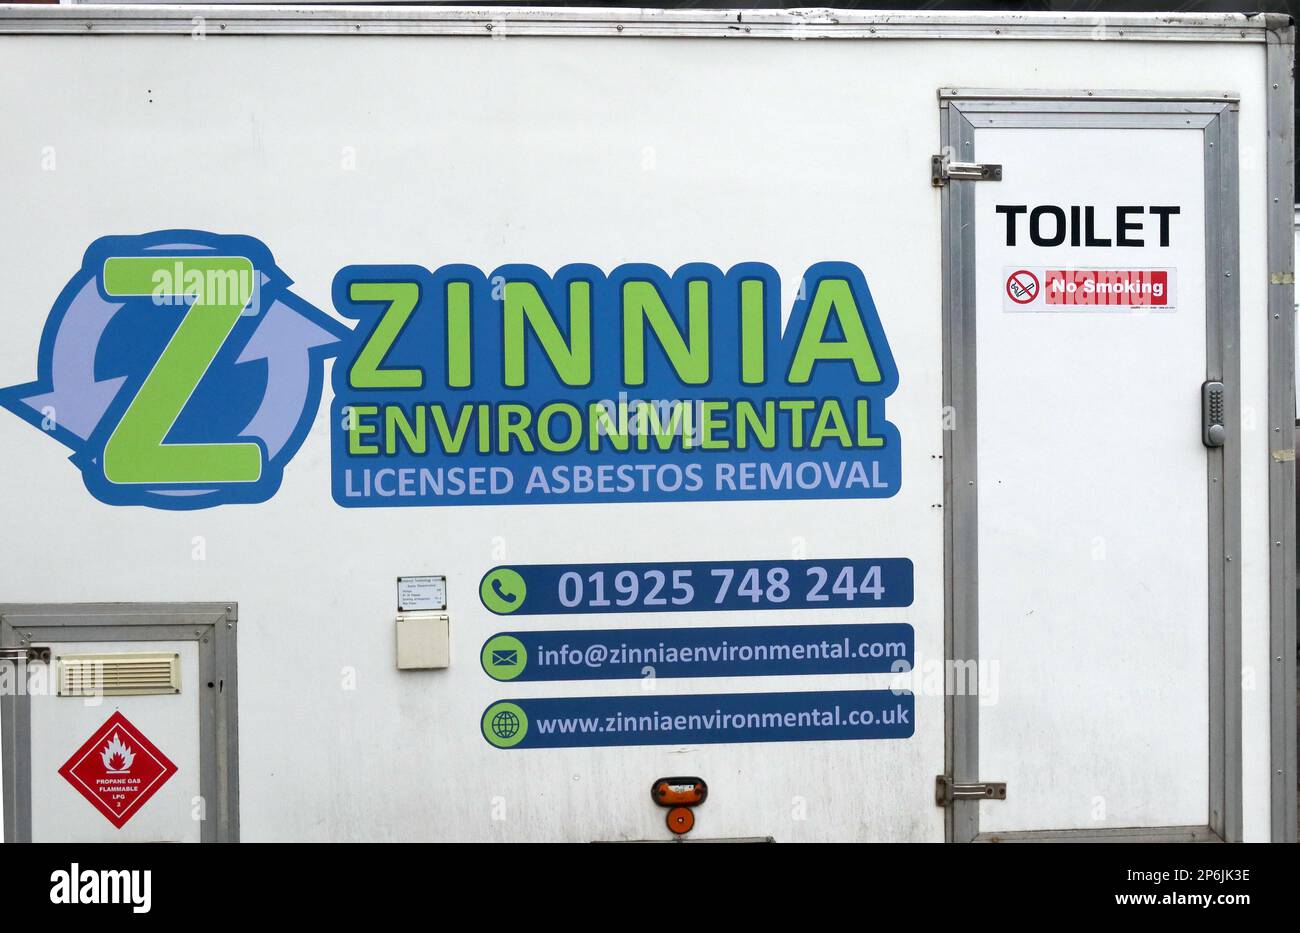 Contractor for licensed asbestos removal services, Zinnia Environmental, in Latchford, Warrington, Cheshire, England,UK Stock Photo